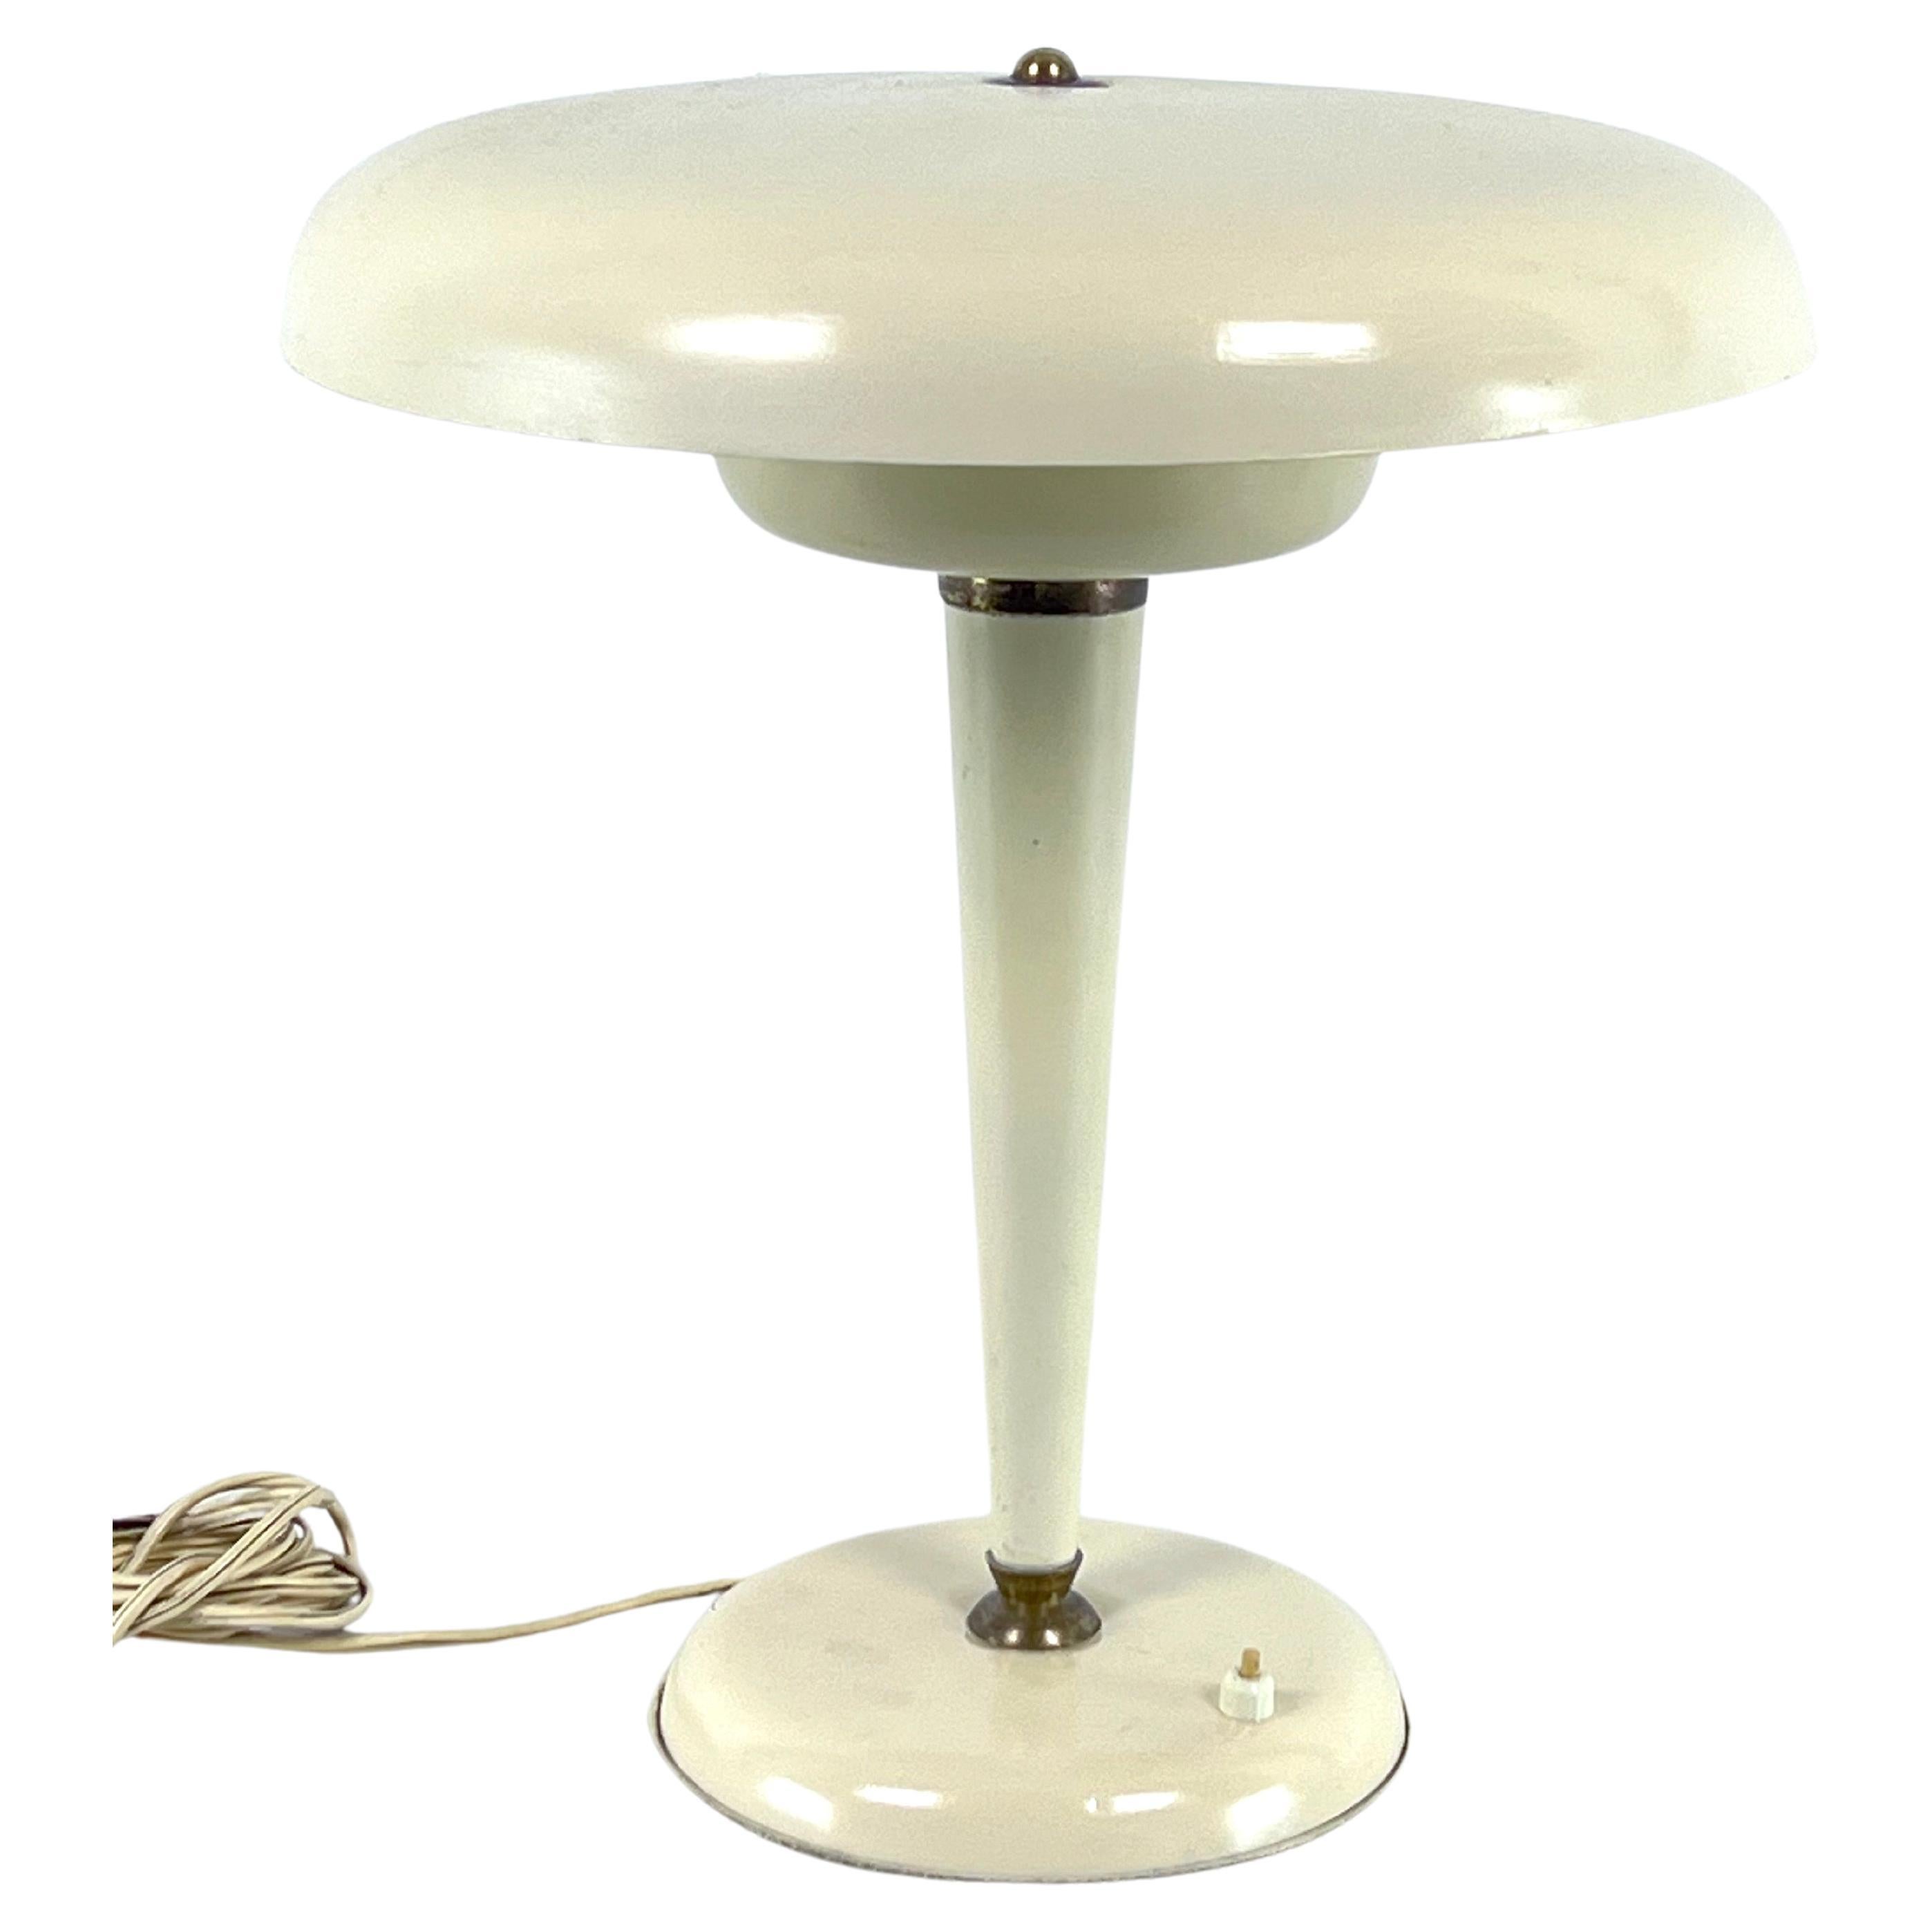 Midcentury Italian Ministerial Desk Lamp in Brass and Ivory Lacquer, Italy, 1950 For Sale